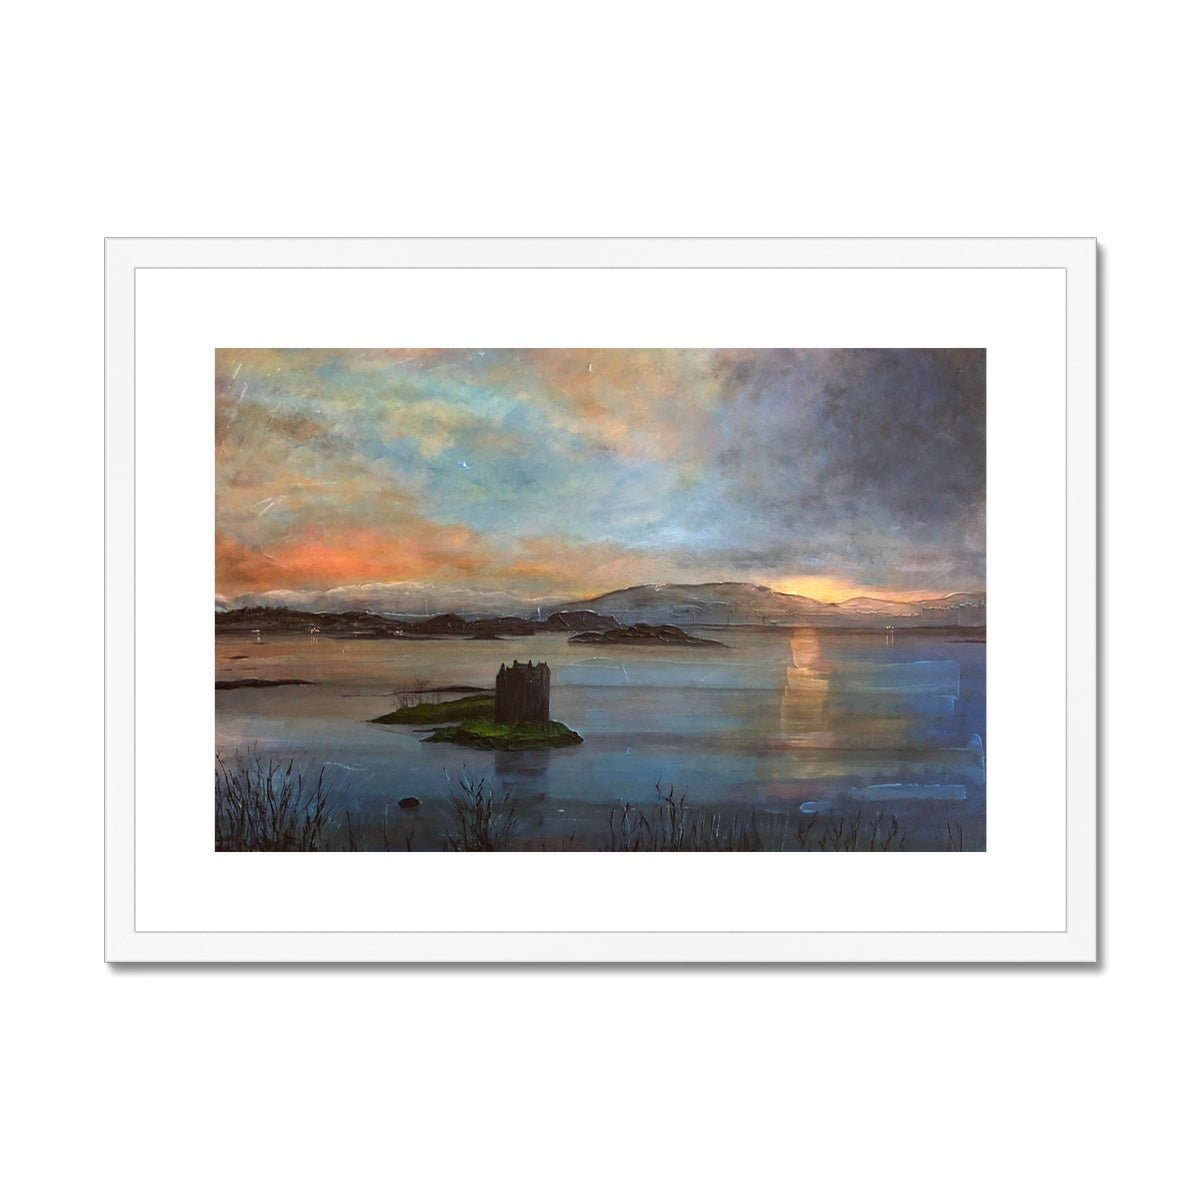 Castle Stalker Twilight Painting | Framed & Mounted Prints From Scotland-Framed & Mounted Prints-Historic & Iconic Scotland Art Gallery-A2 Landscape-White Frame-Paintings, Prints, Homeware, Art Gifts From Scotland By Scottish Artist Kevin Hunter